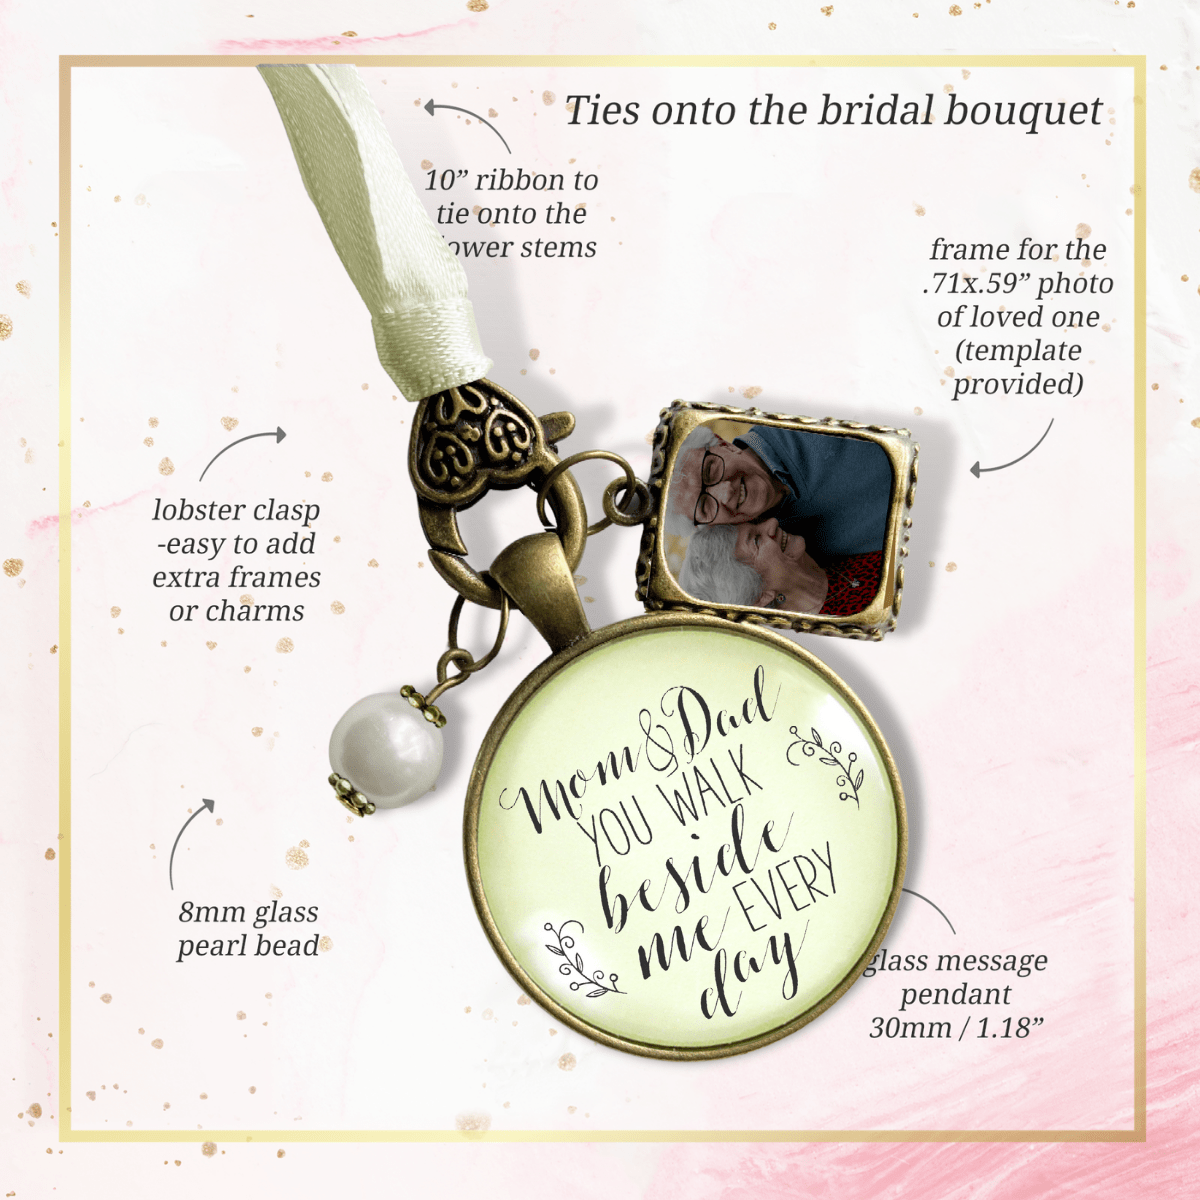 Bouquet Charm Mom Dad Remembrance Parent Of Bride Memory Photo Frame Wedding Memorial - Gutsy Goodness Handmade Jewelry Gifts